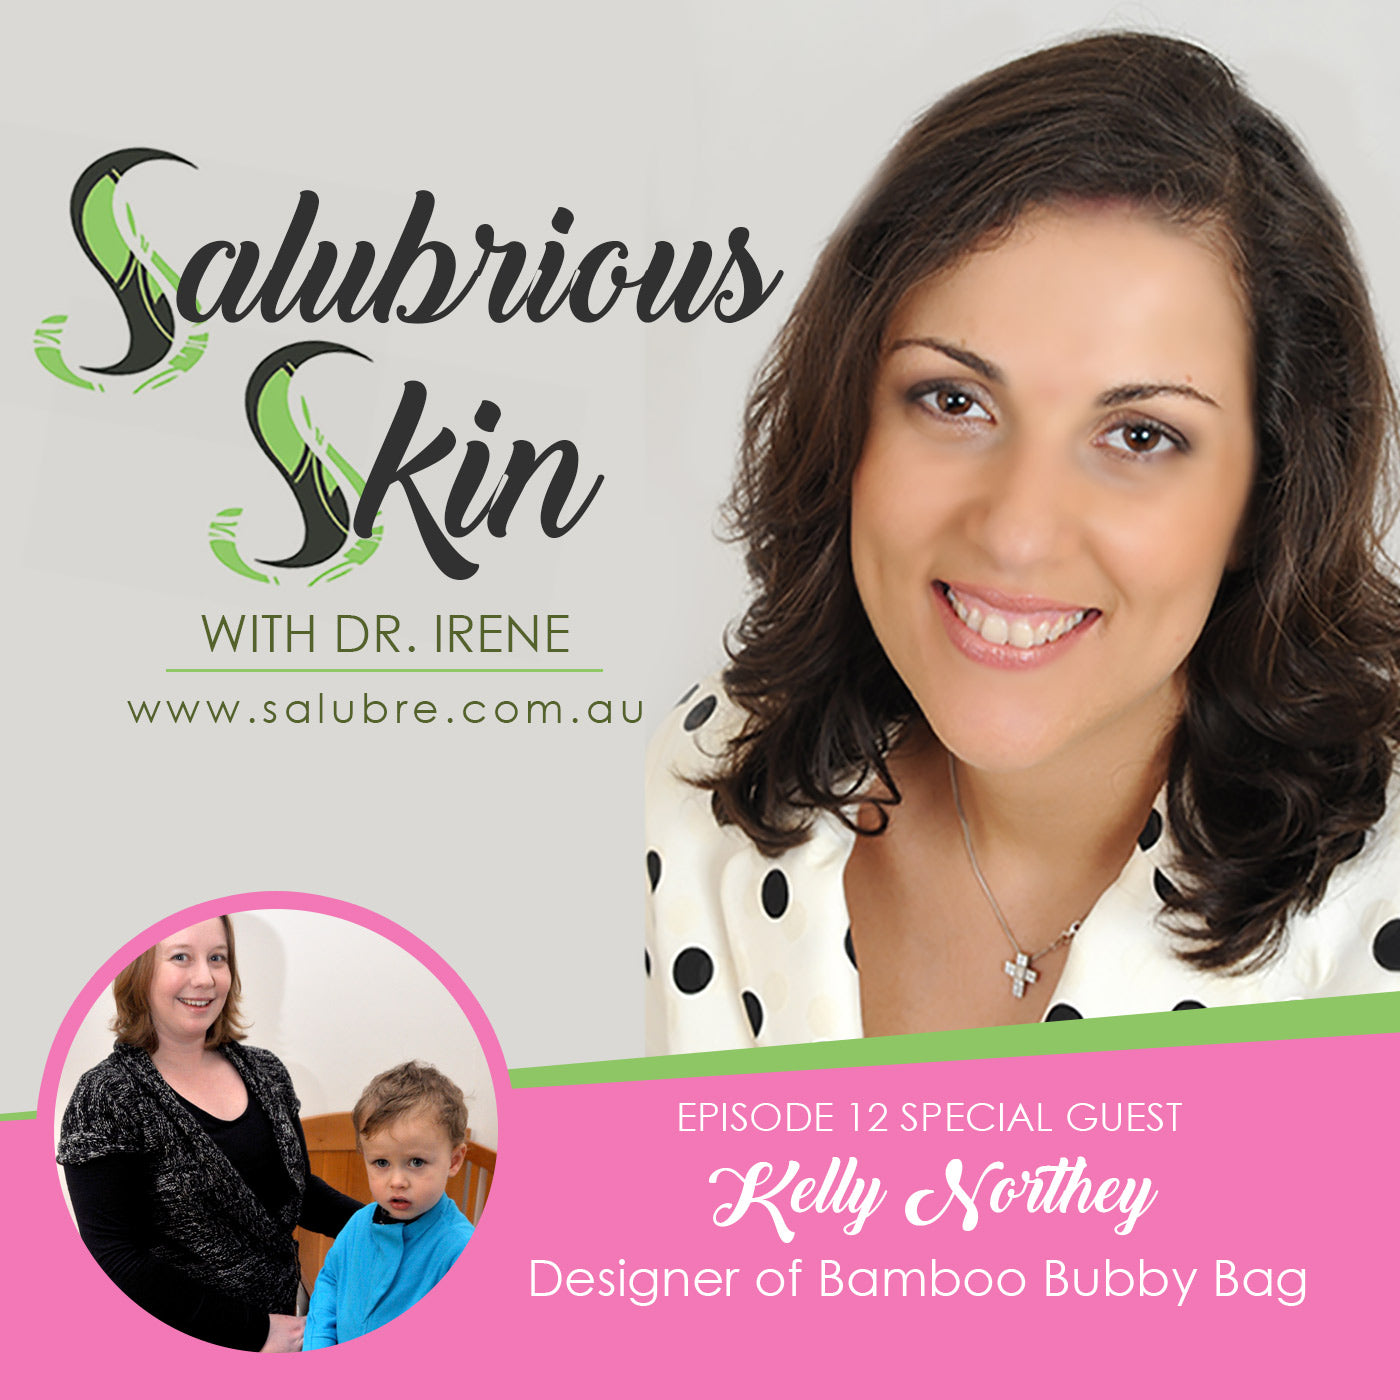 Episode 12: Baby and Child Eczema: Ease the itch and redness with bamboo